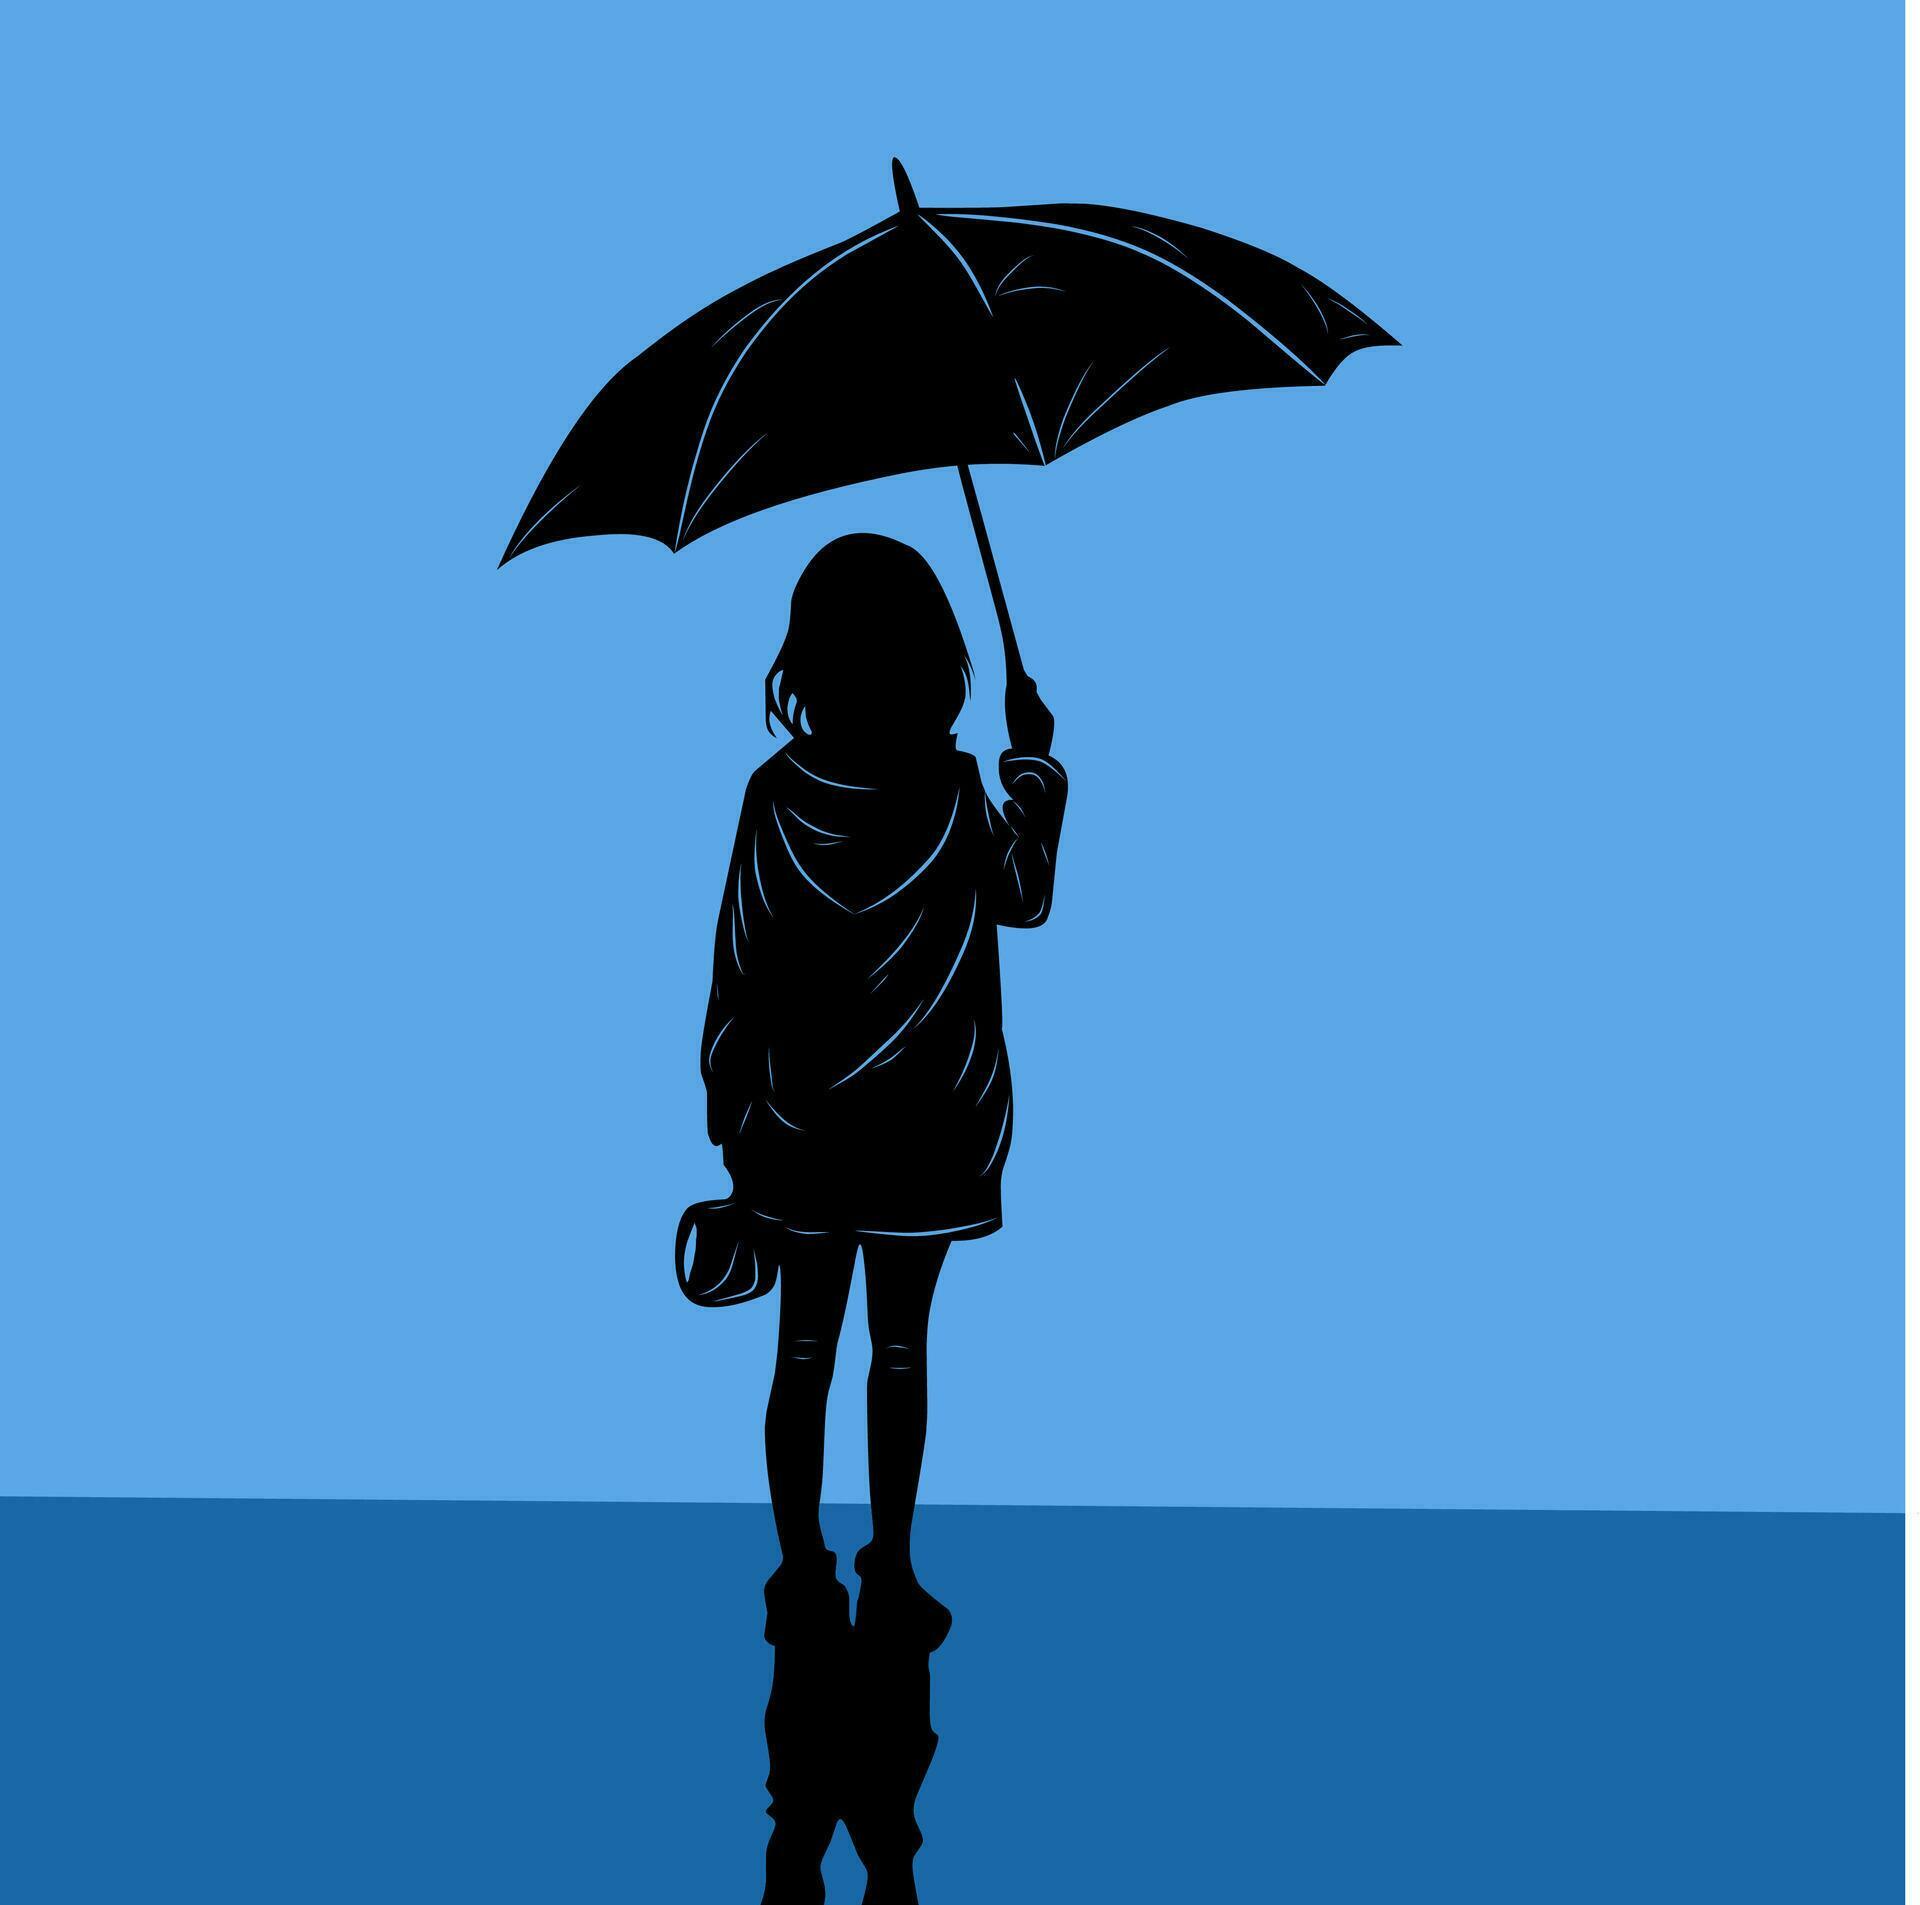 illustration design of a girl with her umbrella on a blue background ...